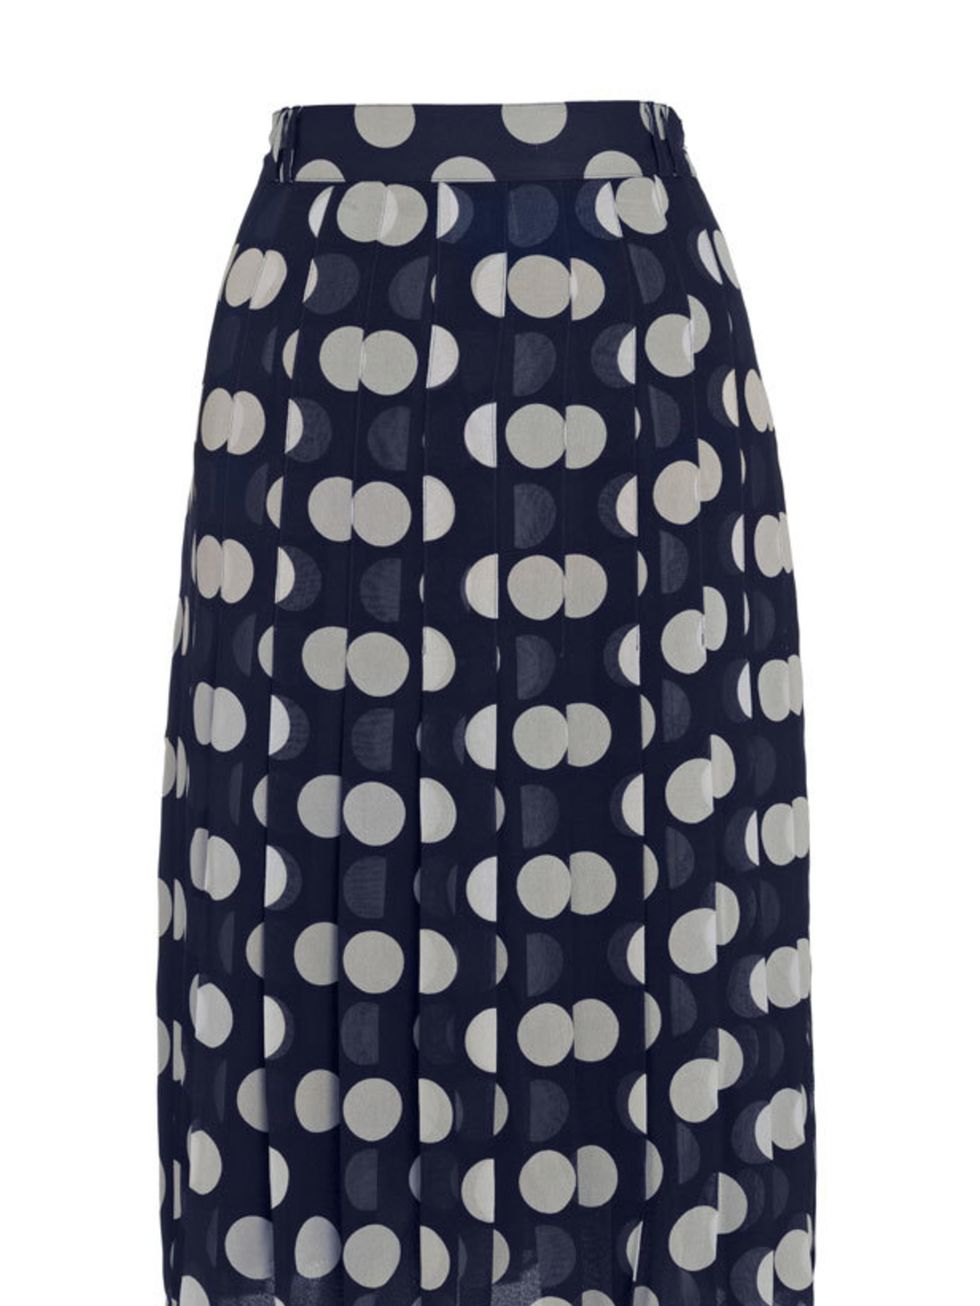 <p><a href="http://www.whistles.co.uk/fcp/categorylist/dept/shop?resetFilters=true">Whistles</a> polka dot skirt, £110</p>